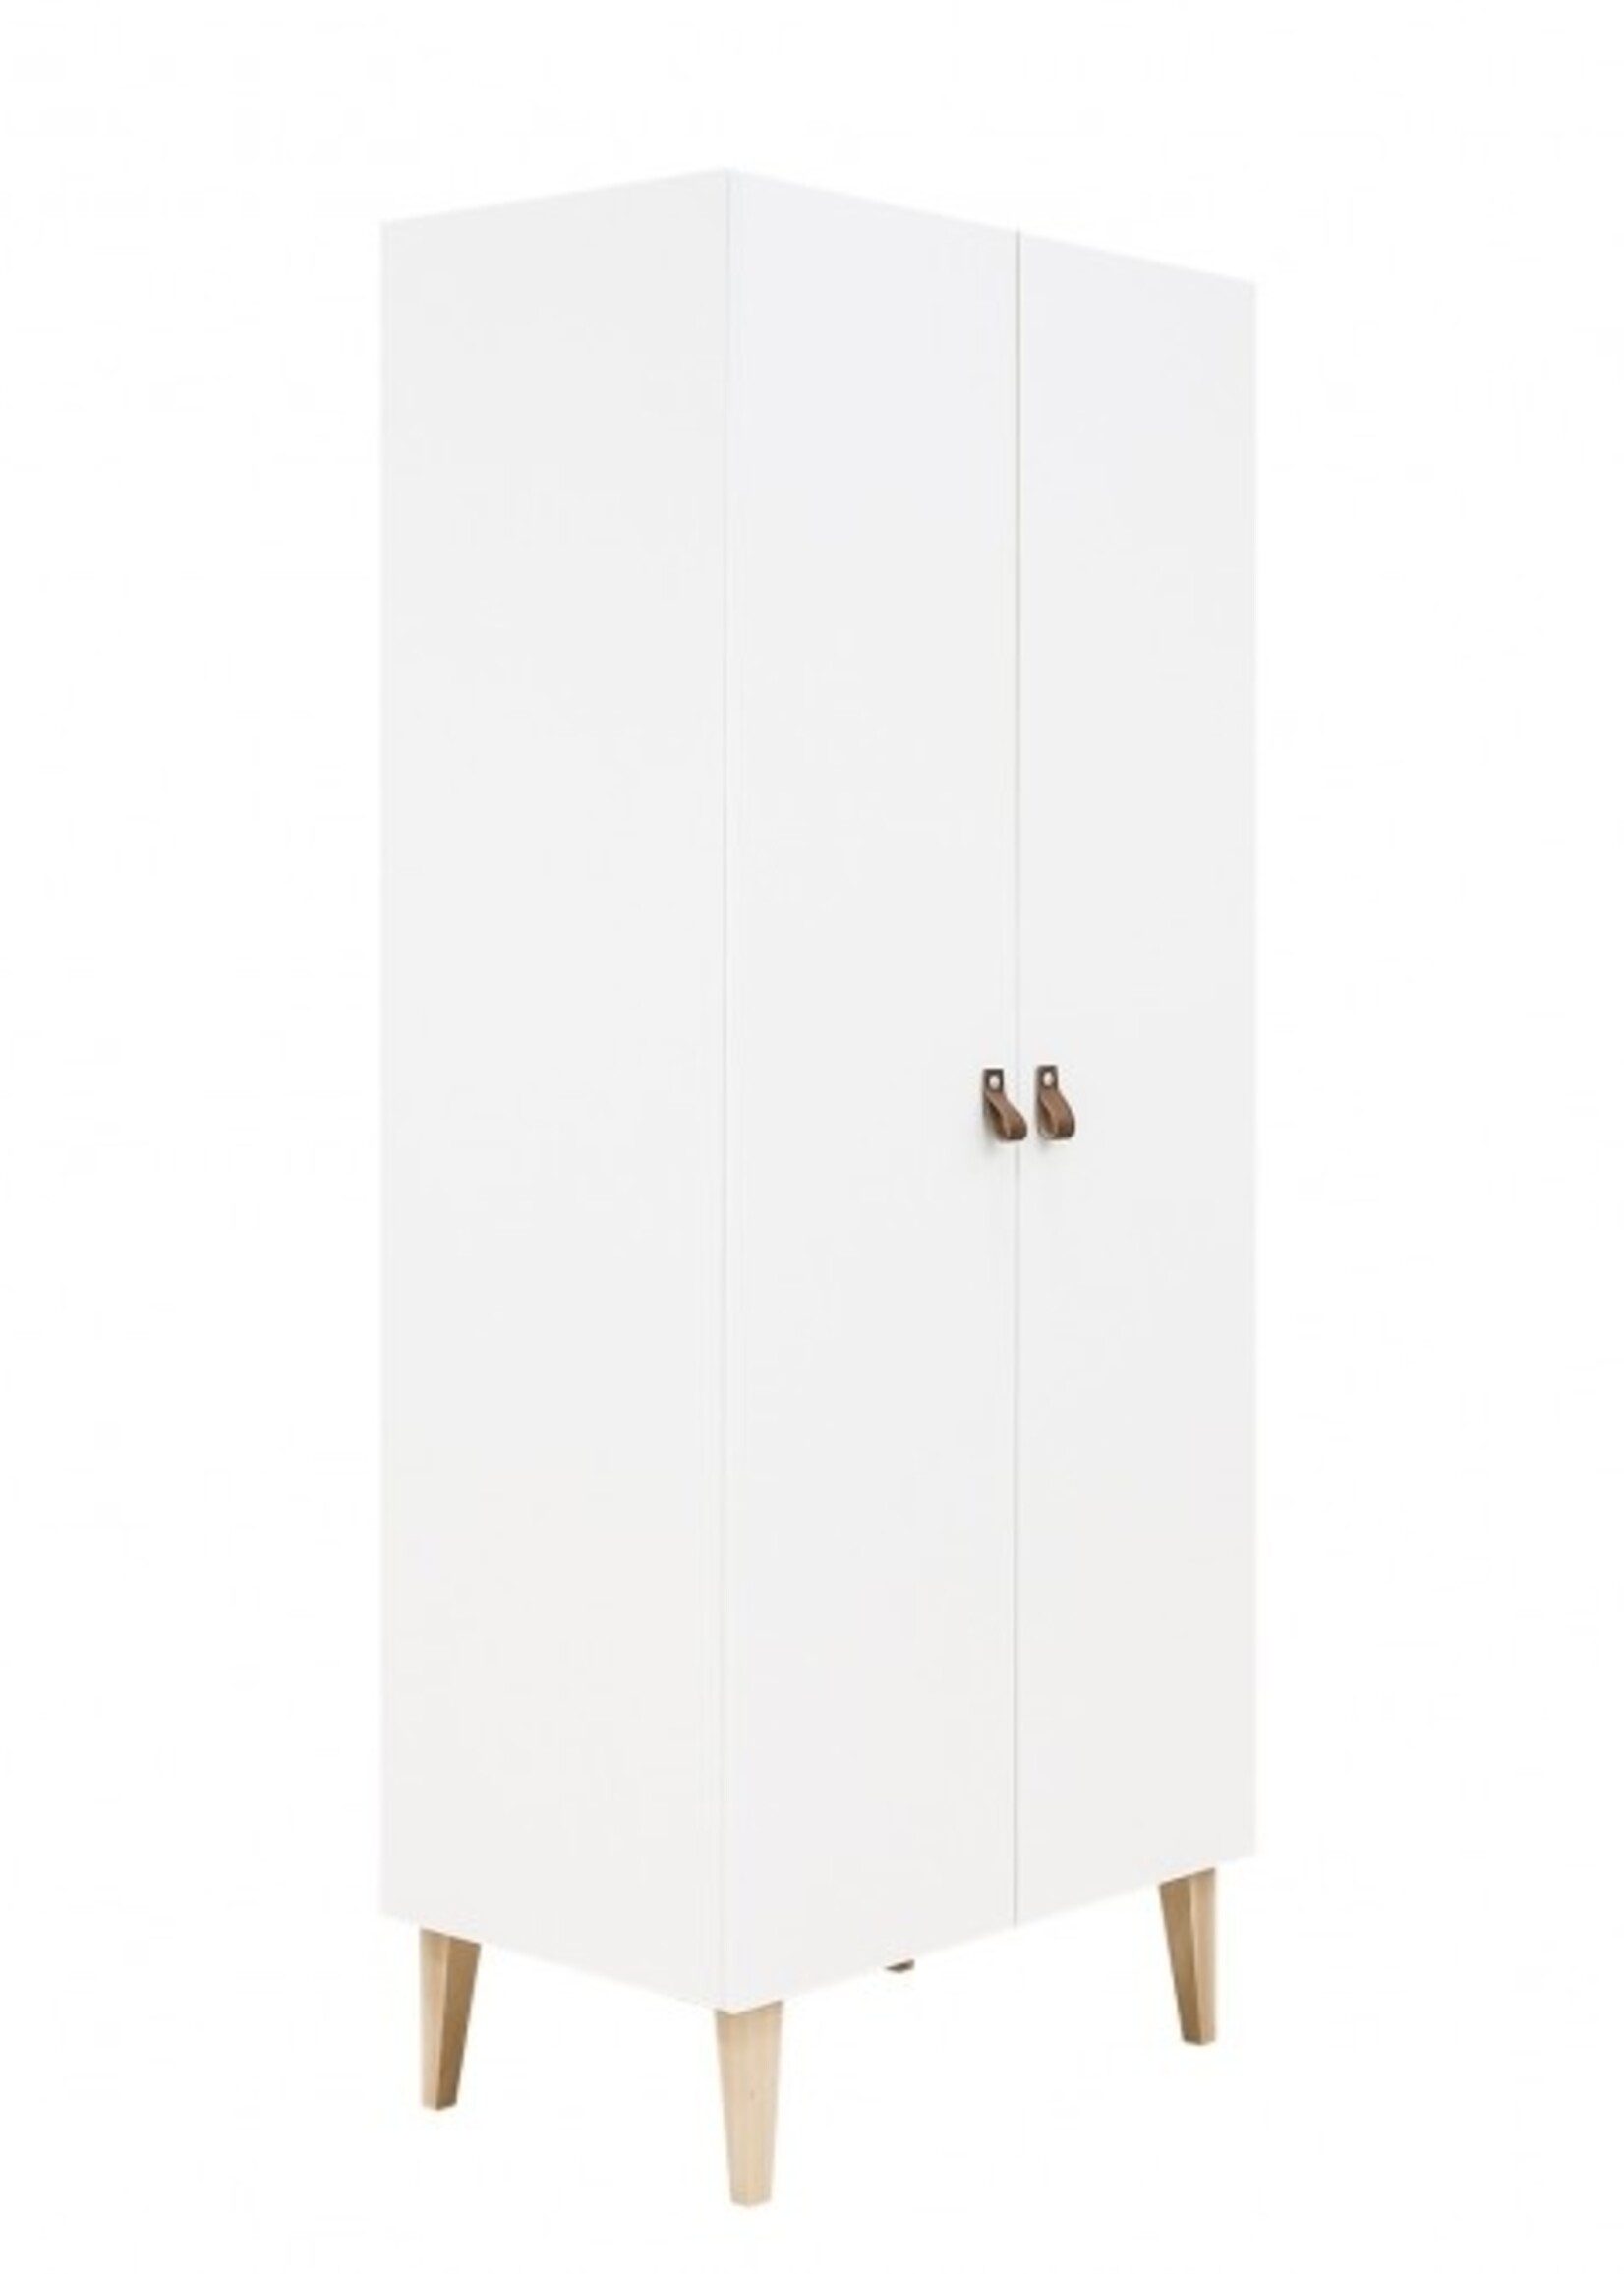 BOPITA Bed 60x120 + Chest of drawers + Closet Indy white / natural